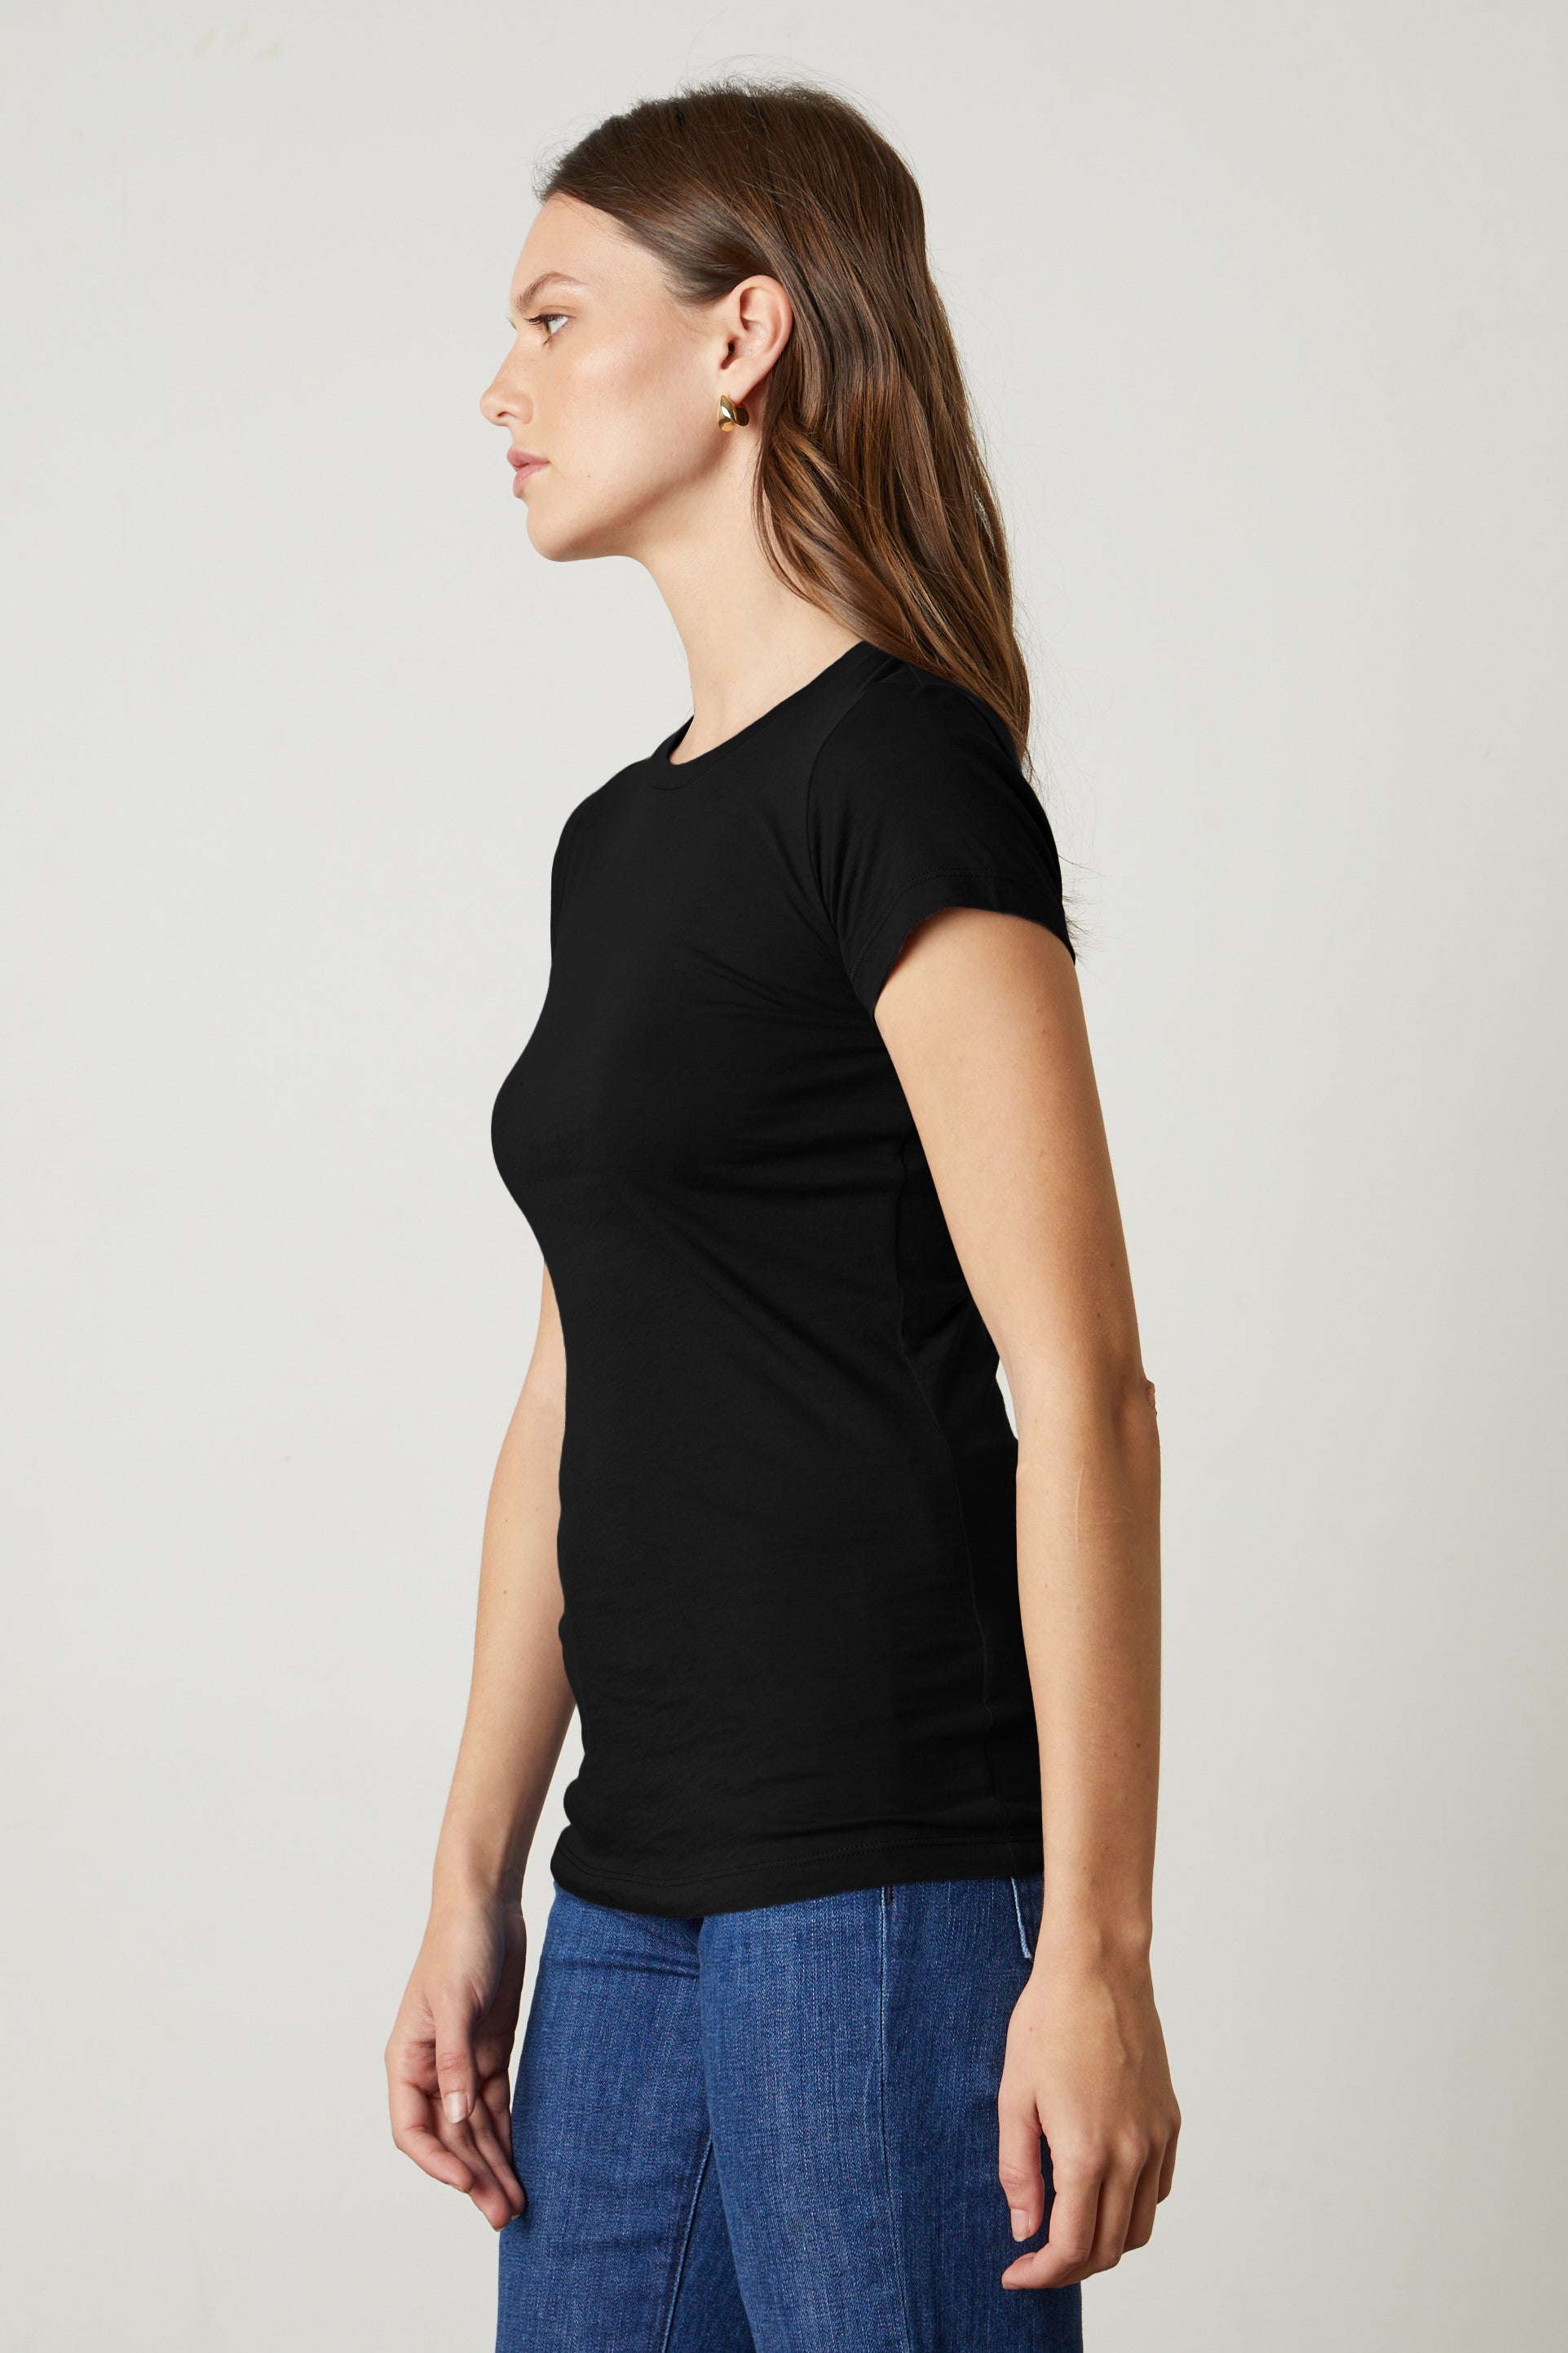   A woman donning a JEMMA GAUZY WHISPER FITTED CREW NECK TEE by Velvet by Graham & Spencer and jeans. 